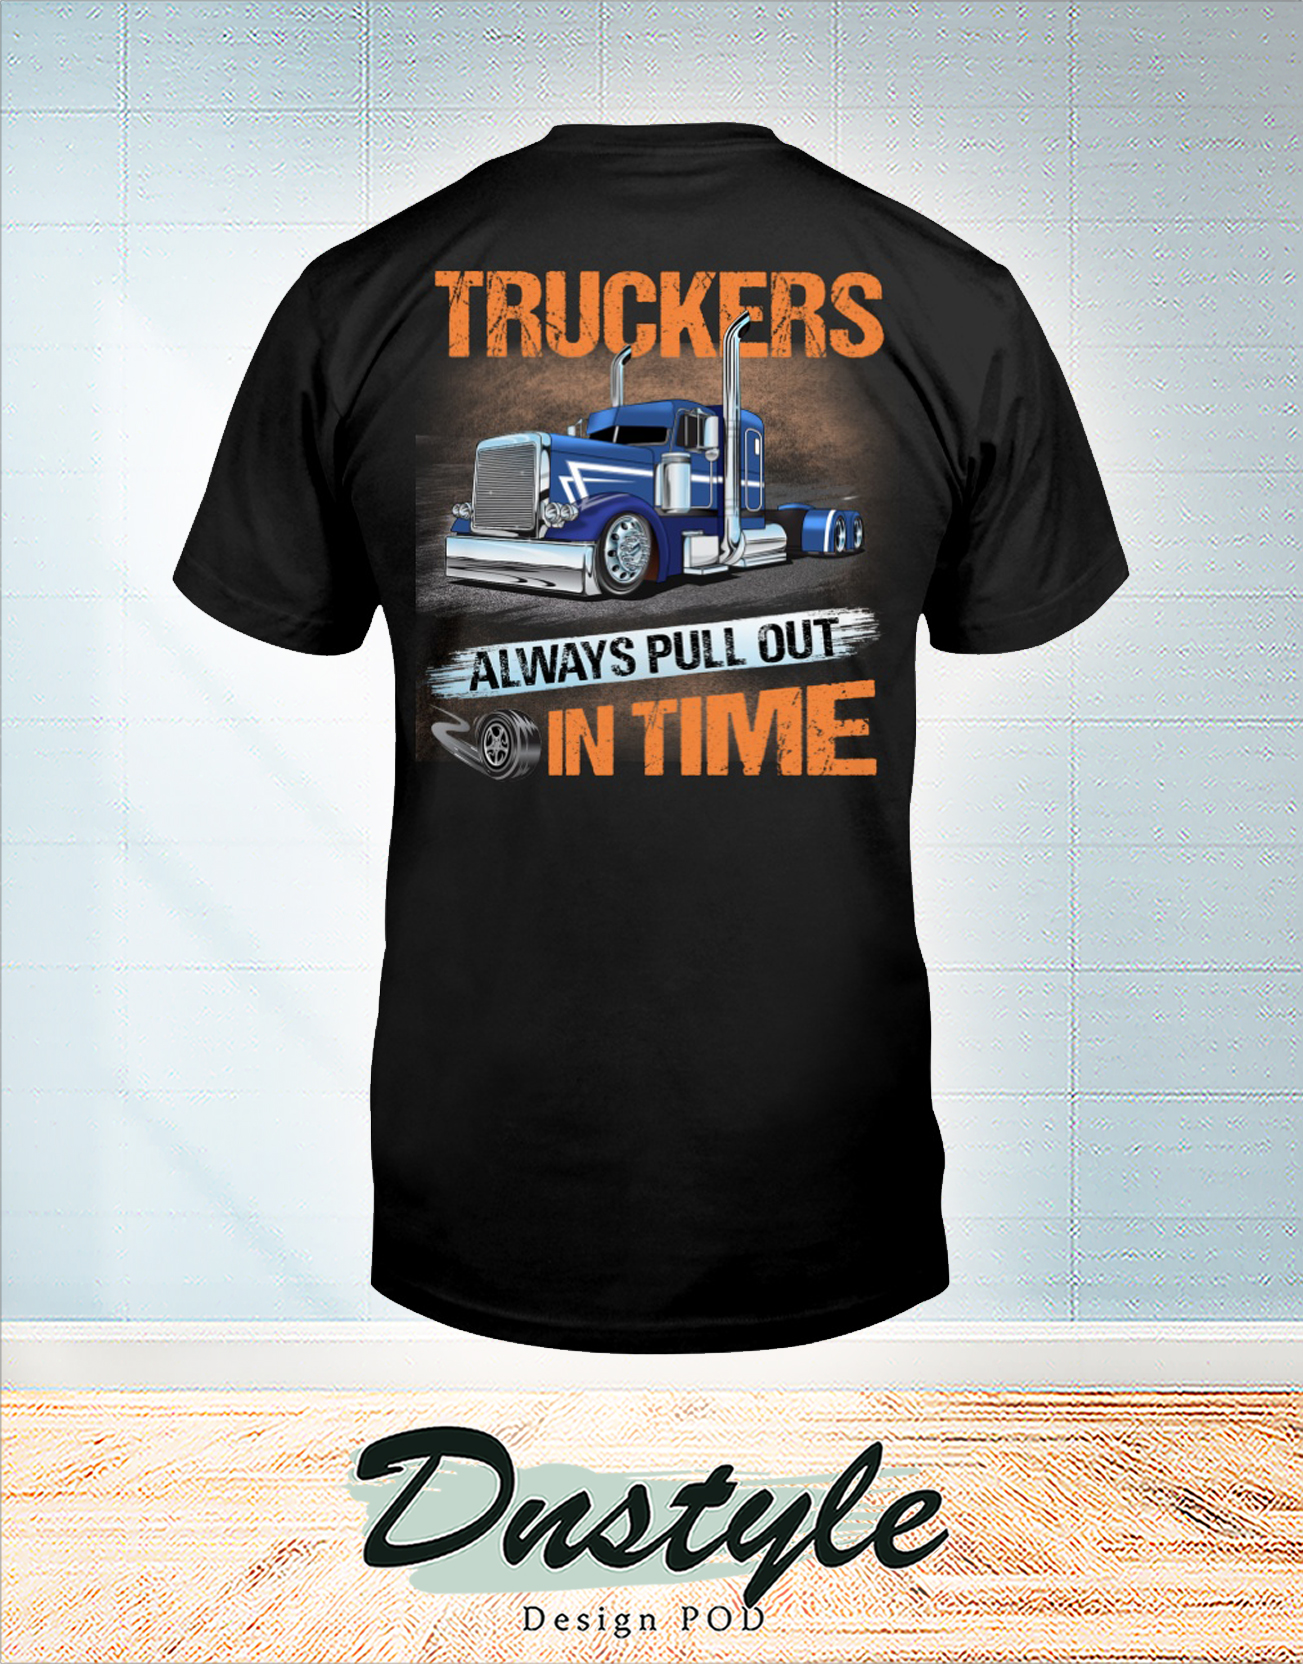 Truckers always pull out in time t-shirt